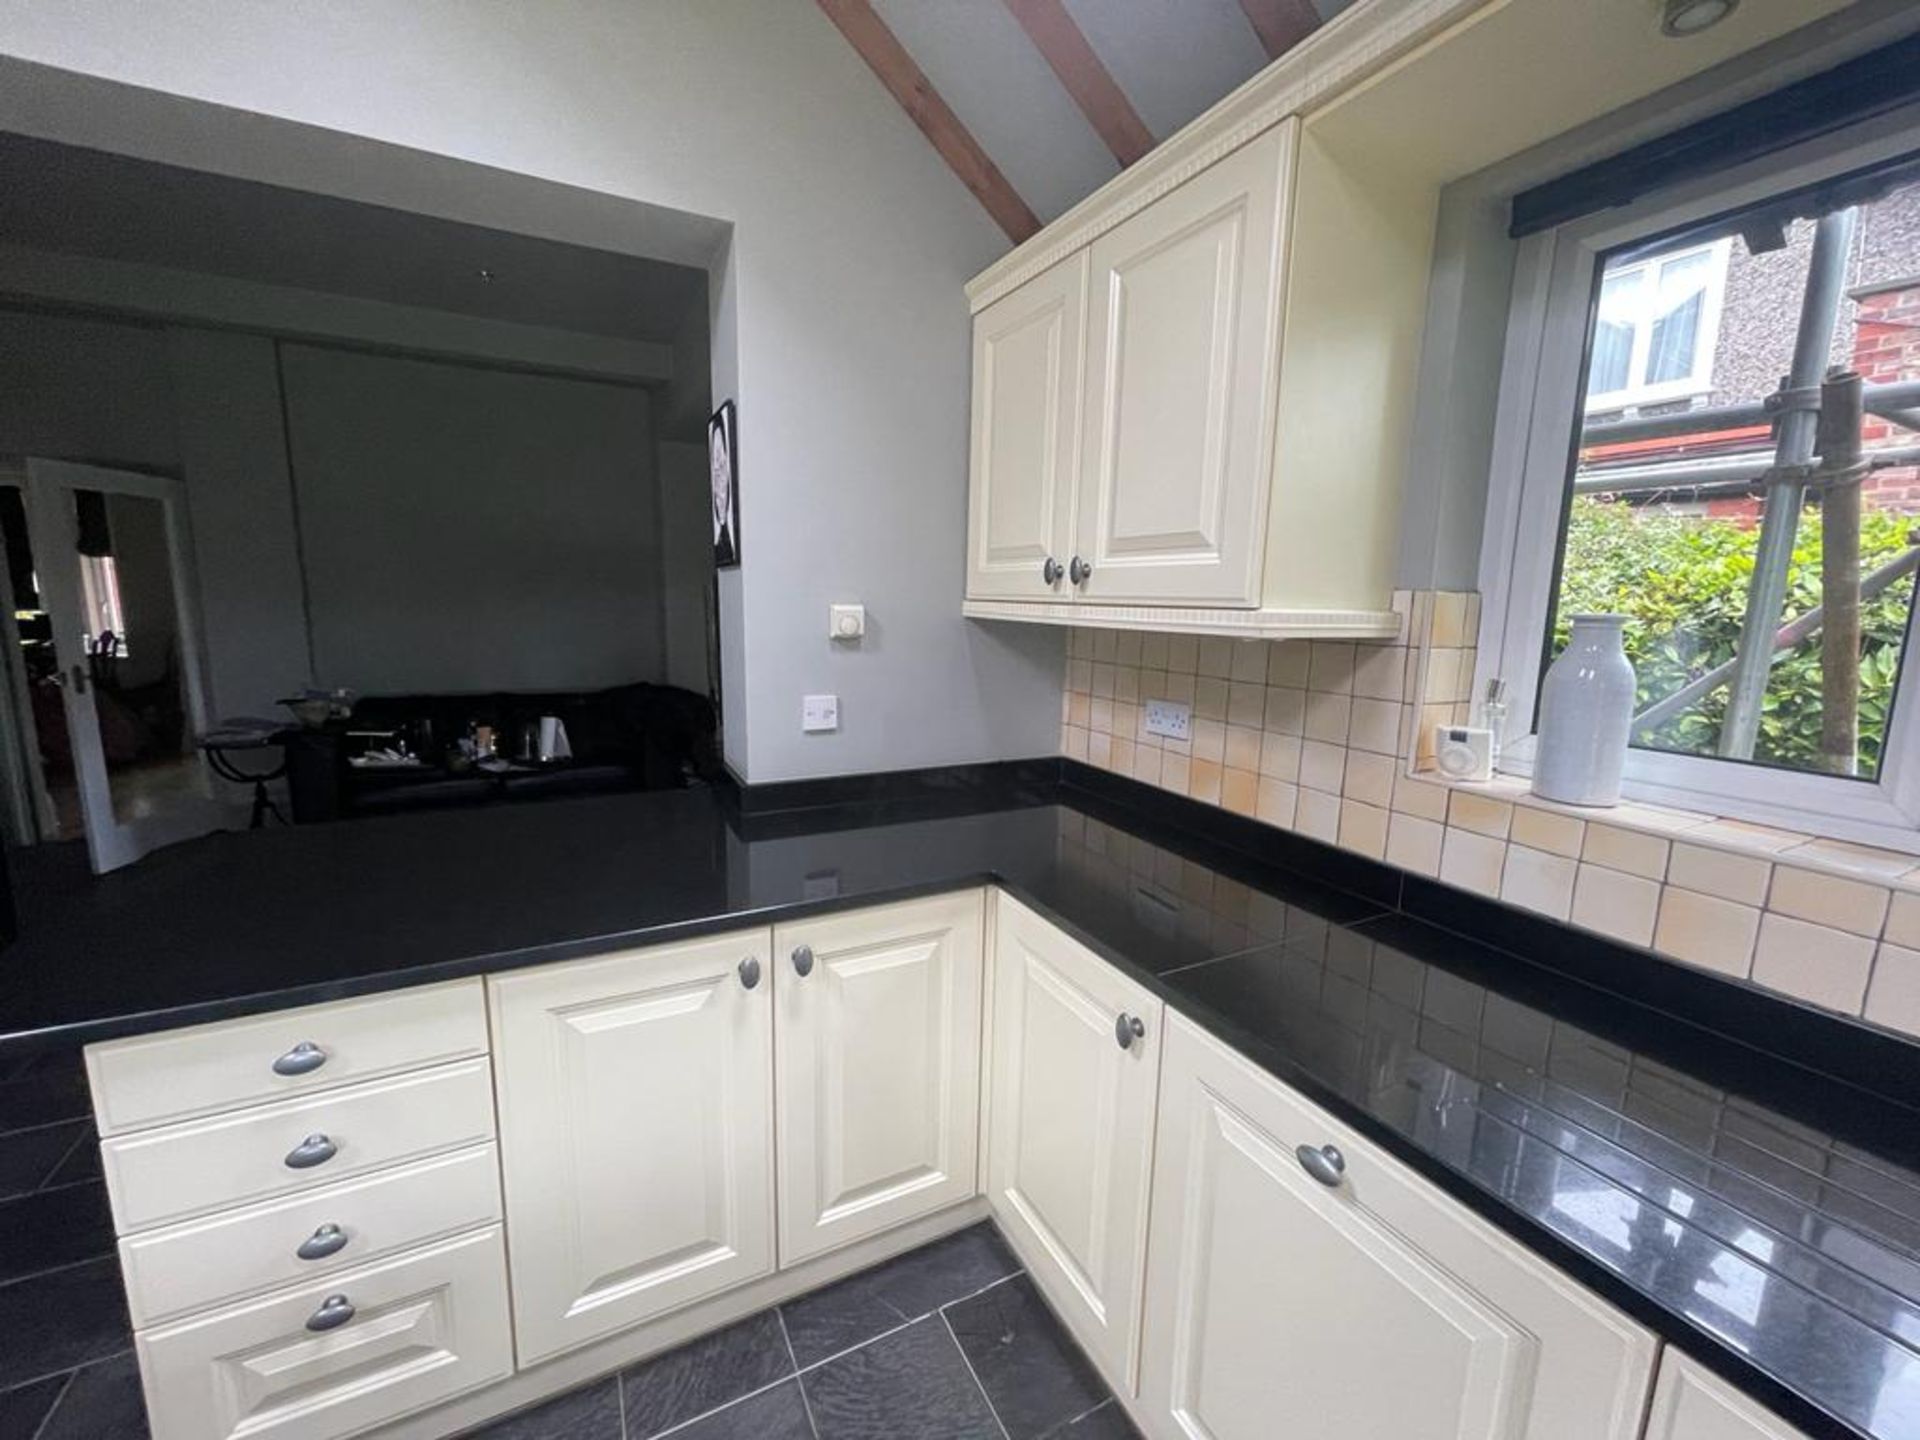 1 x Bespoke Keller Kitchen With Branded Appliances - From An Exclusive Property - No VAT On The - Image 120 of 127